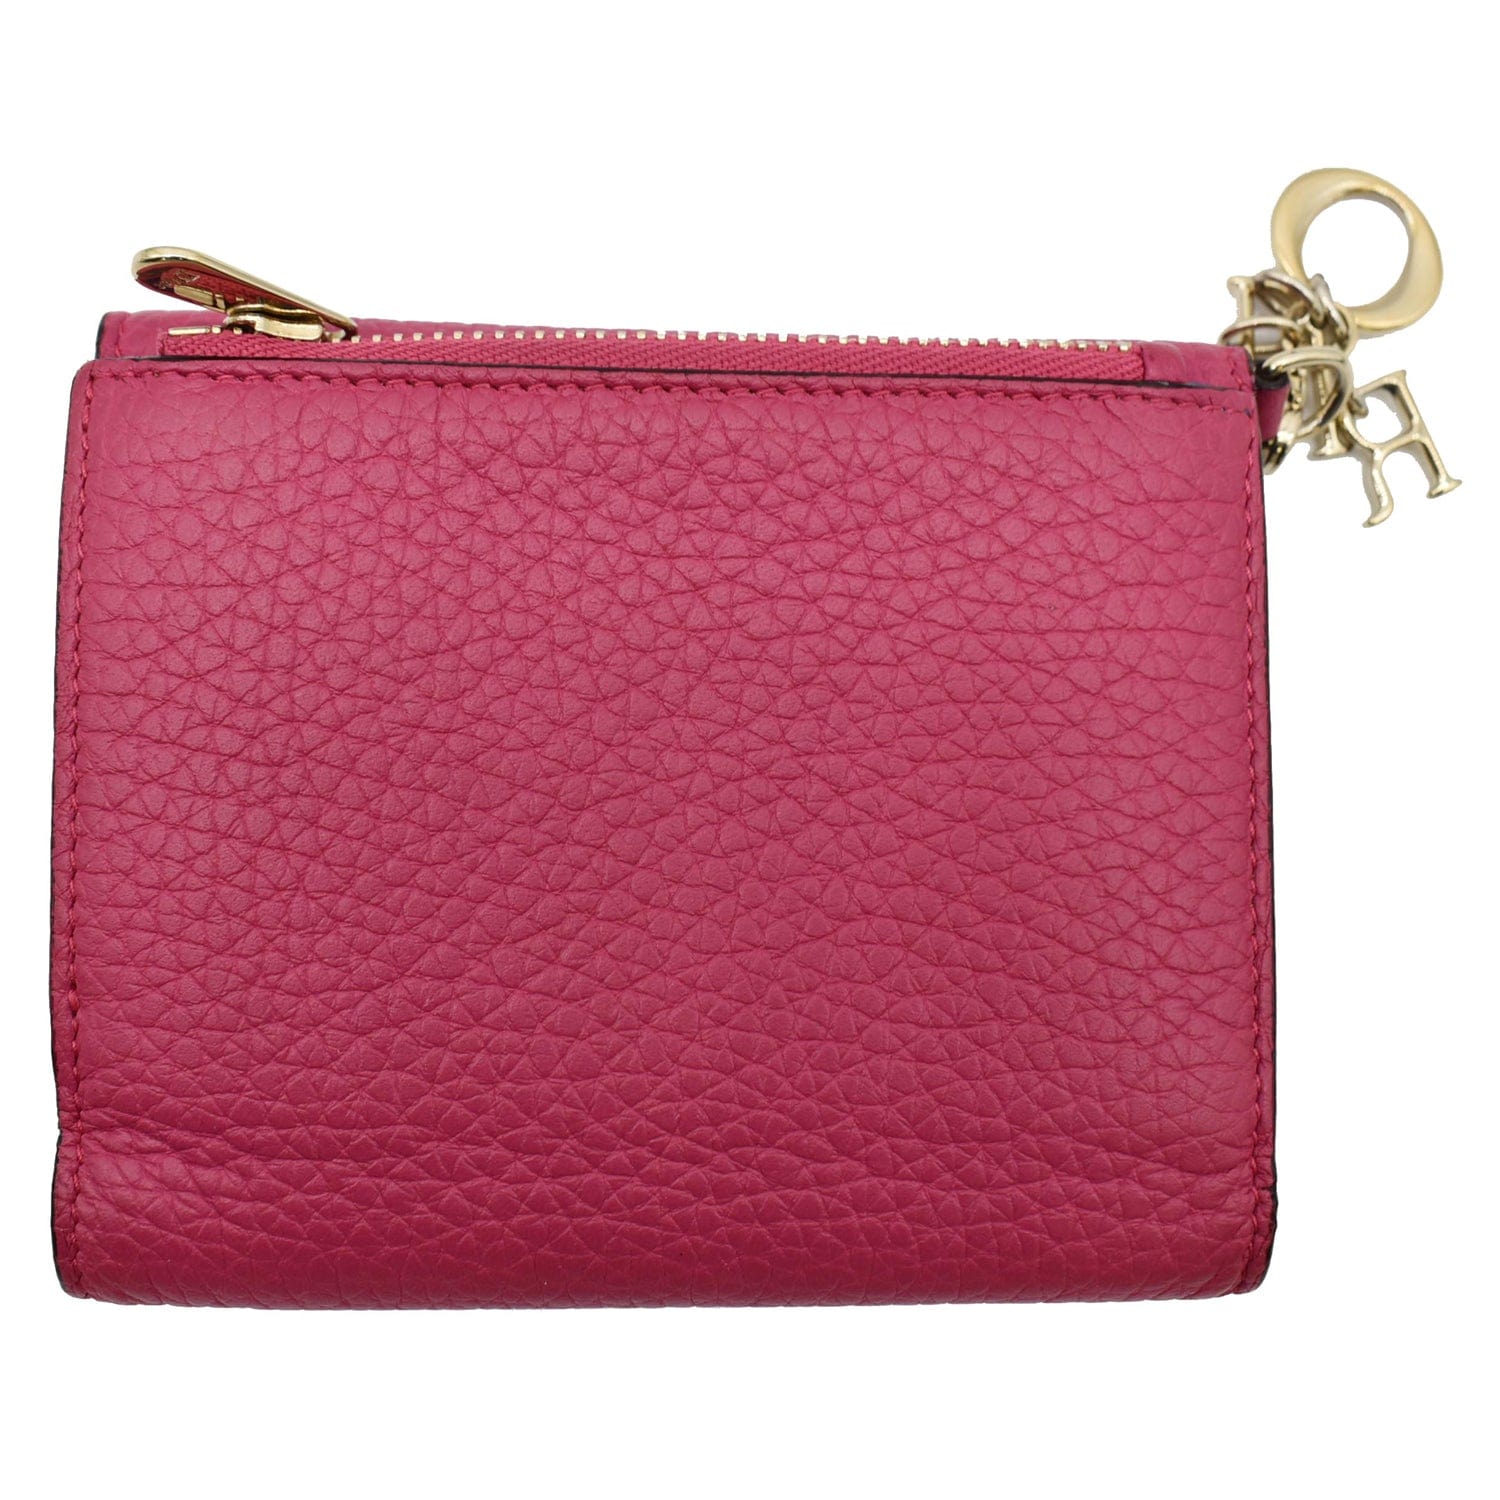 CHRISTIAN DIOR Diorissimo Compact Grained Leather Wallet Pink - 20% OF